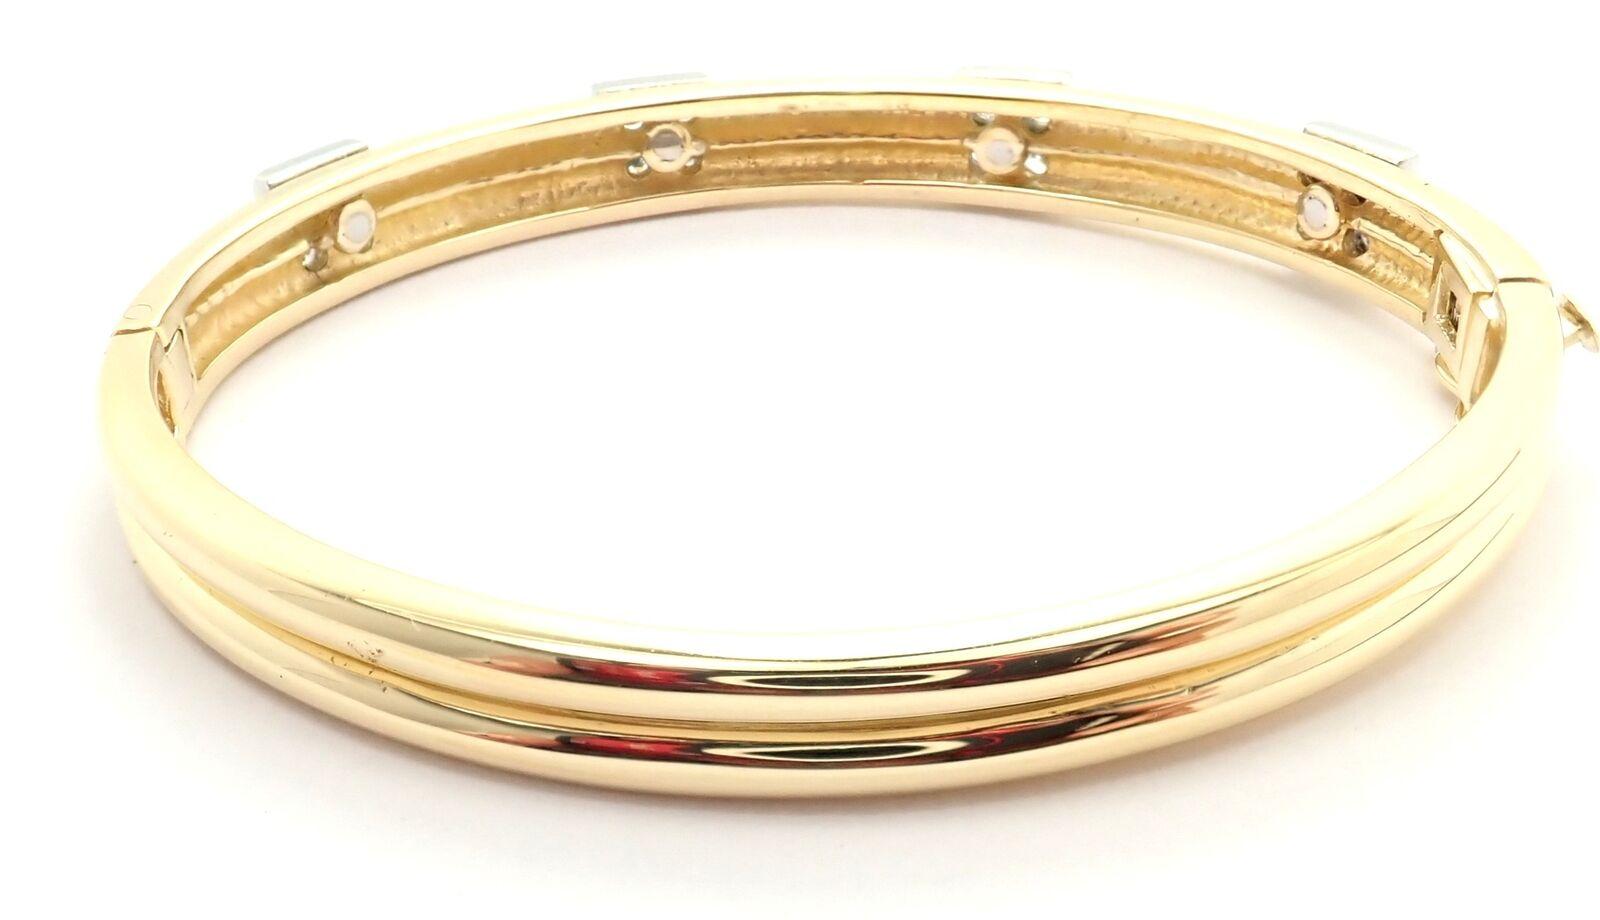 Vintage Tiffany & Co. 18k Yellow Gold Diamond Bangle Bracelet. 
With 16 brilliant round cut diamond VS1 clarity, E color total weight approximately 1.12ct
Details:
Length: 6.5